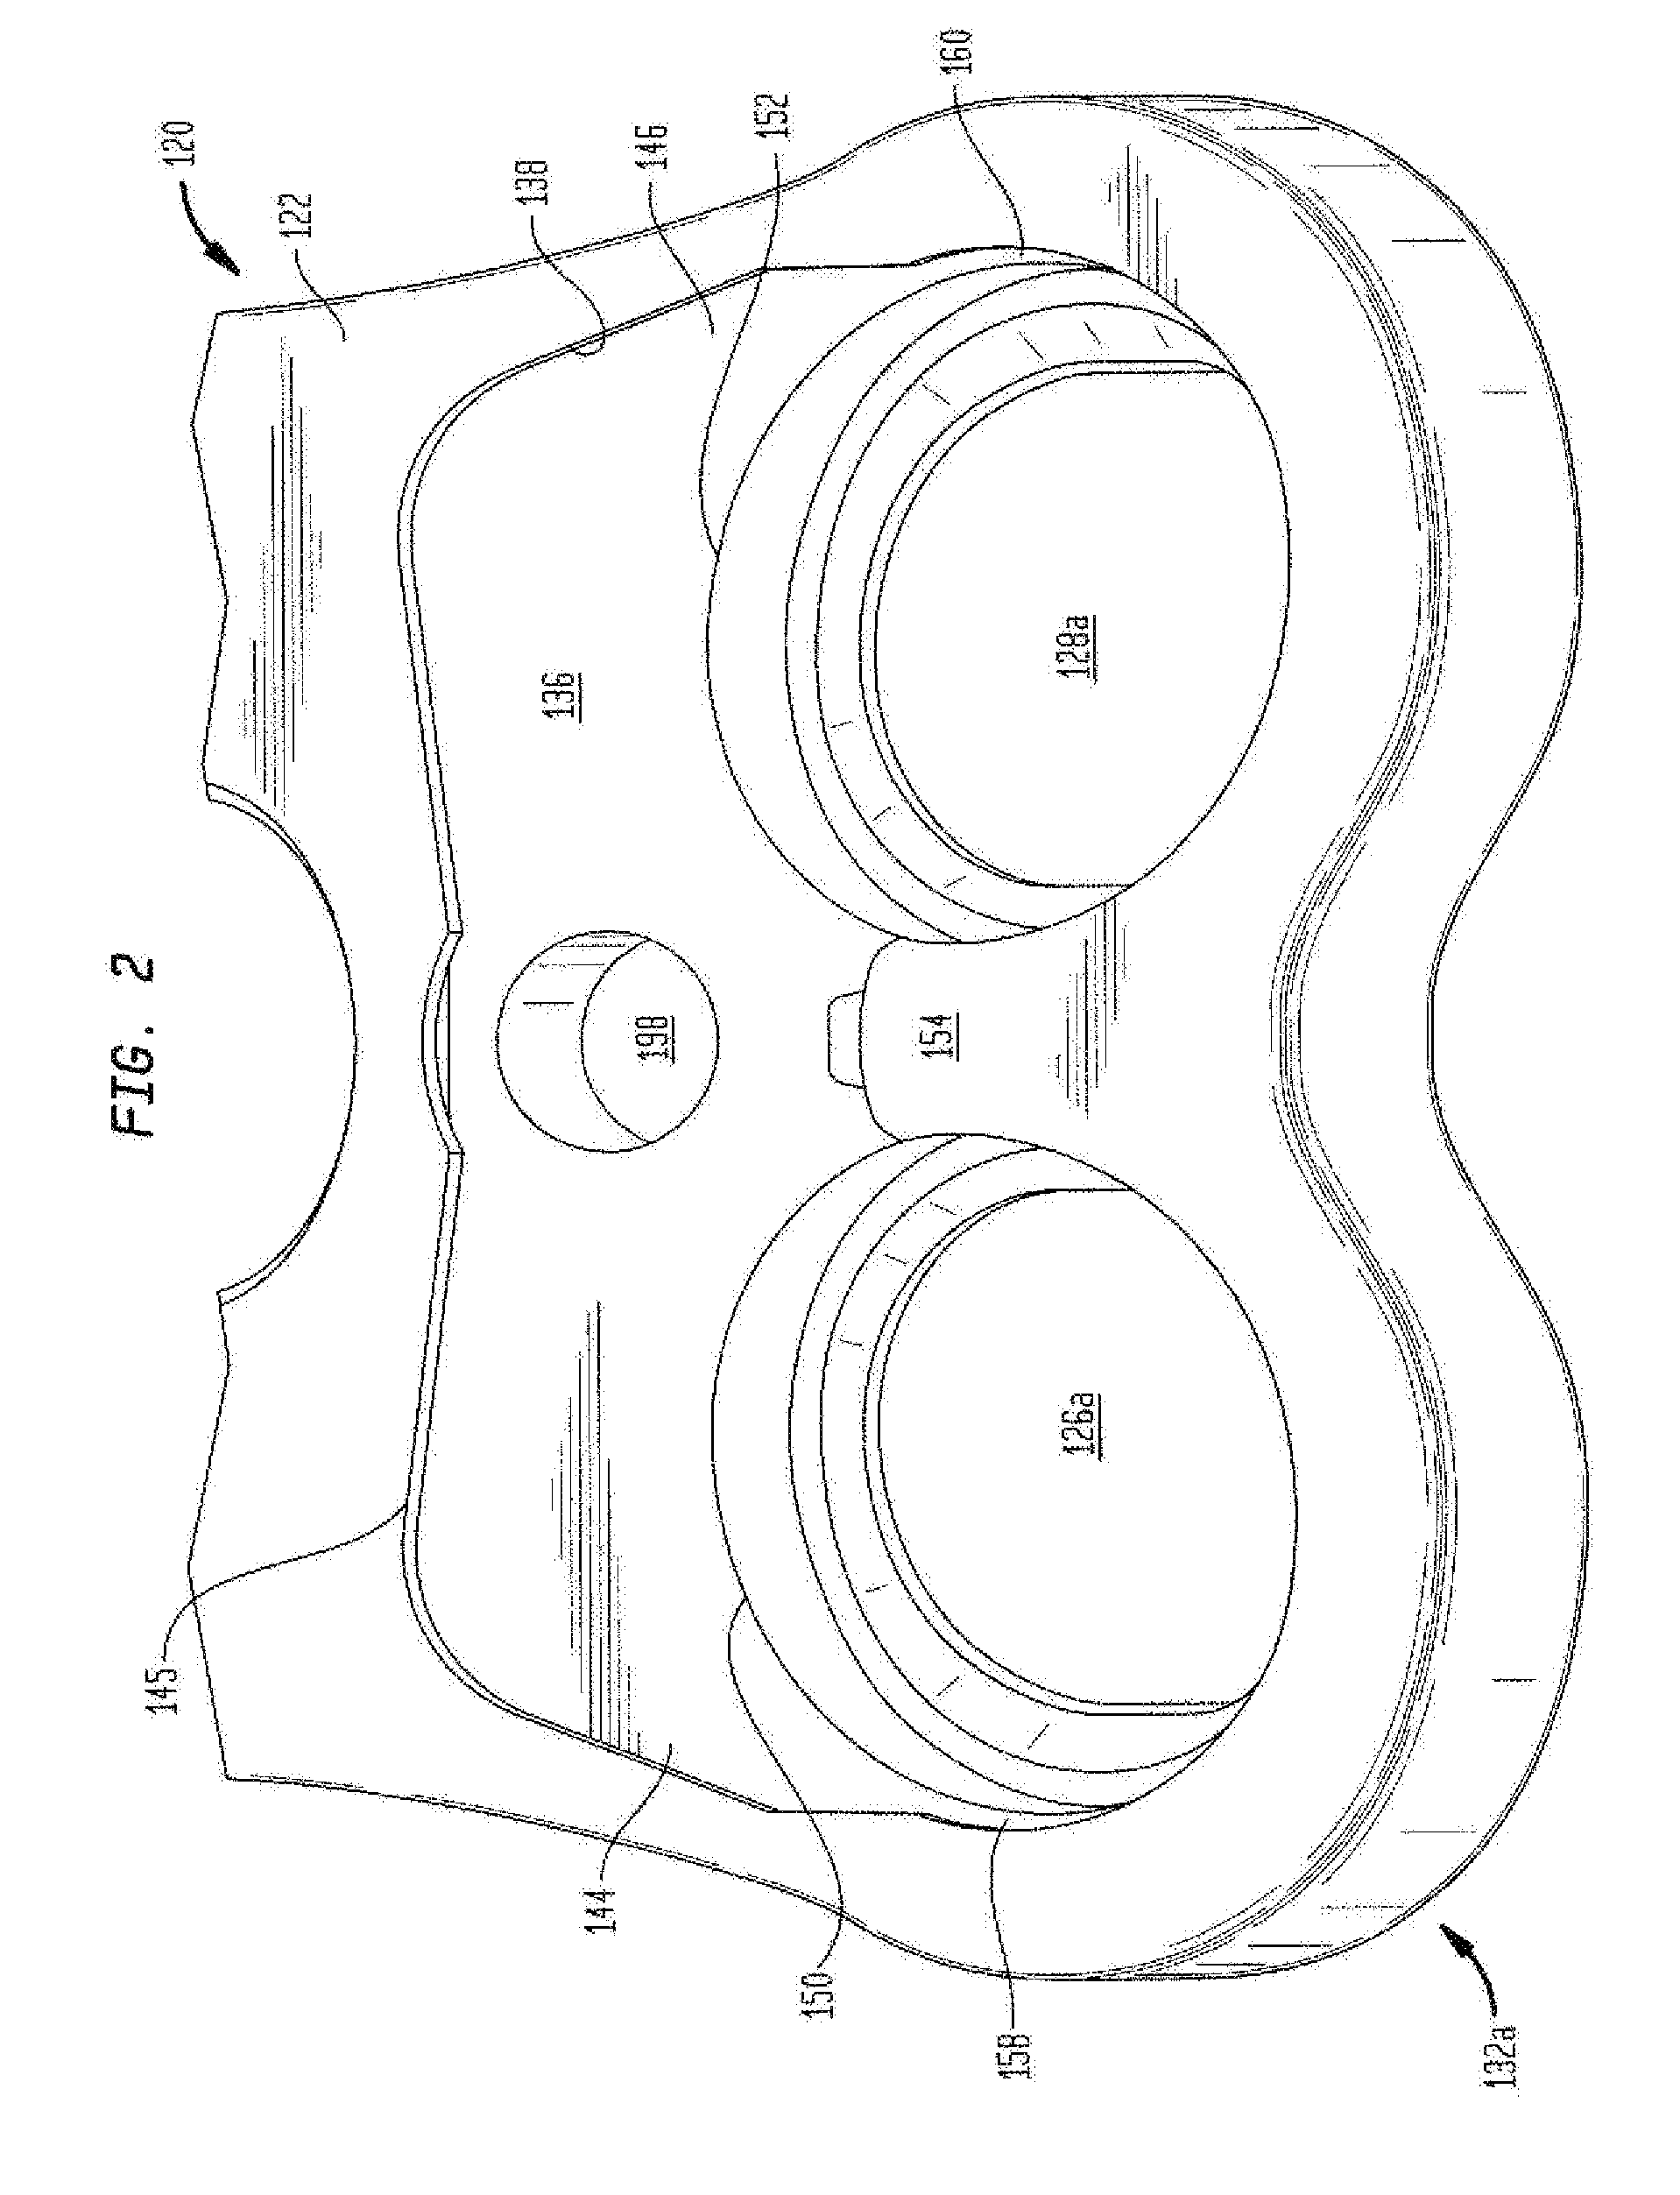 Cervical plate with a feedback device for selective association with bone screw blocking mechanism